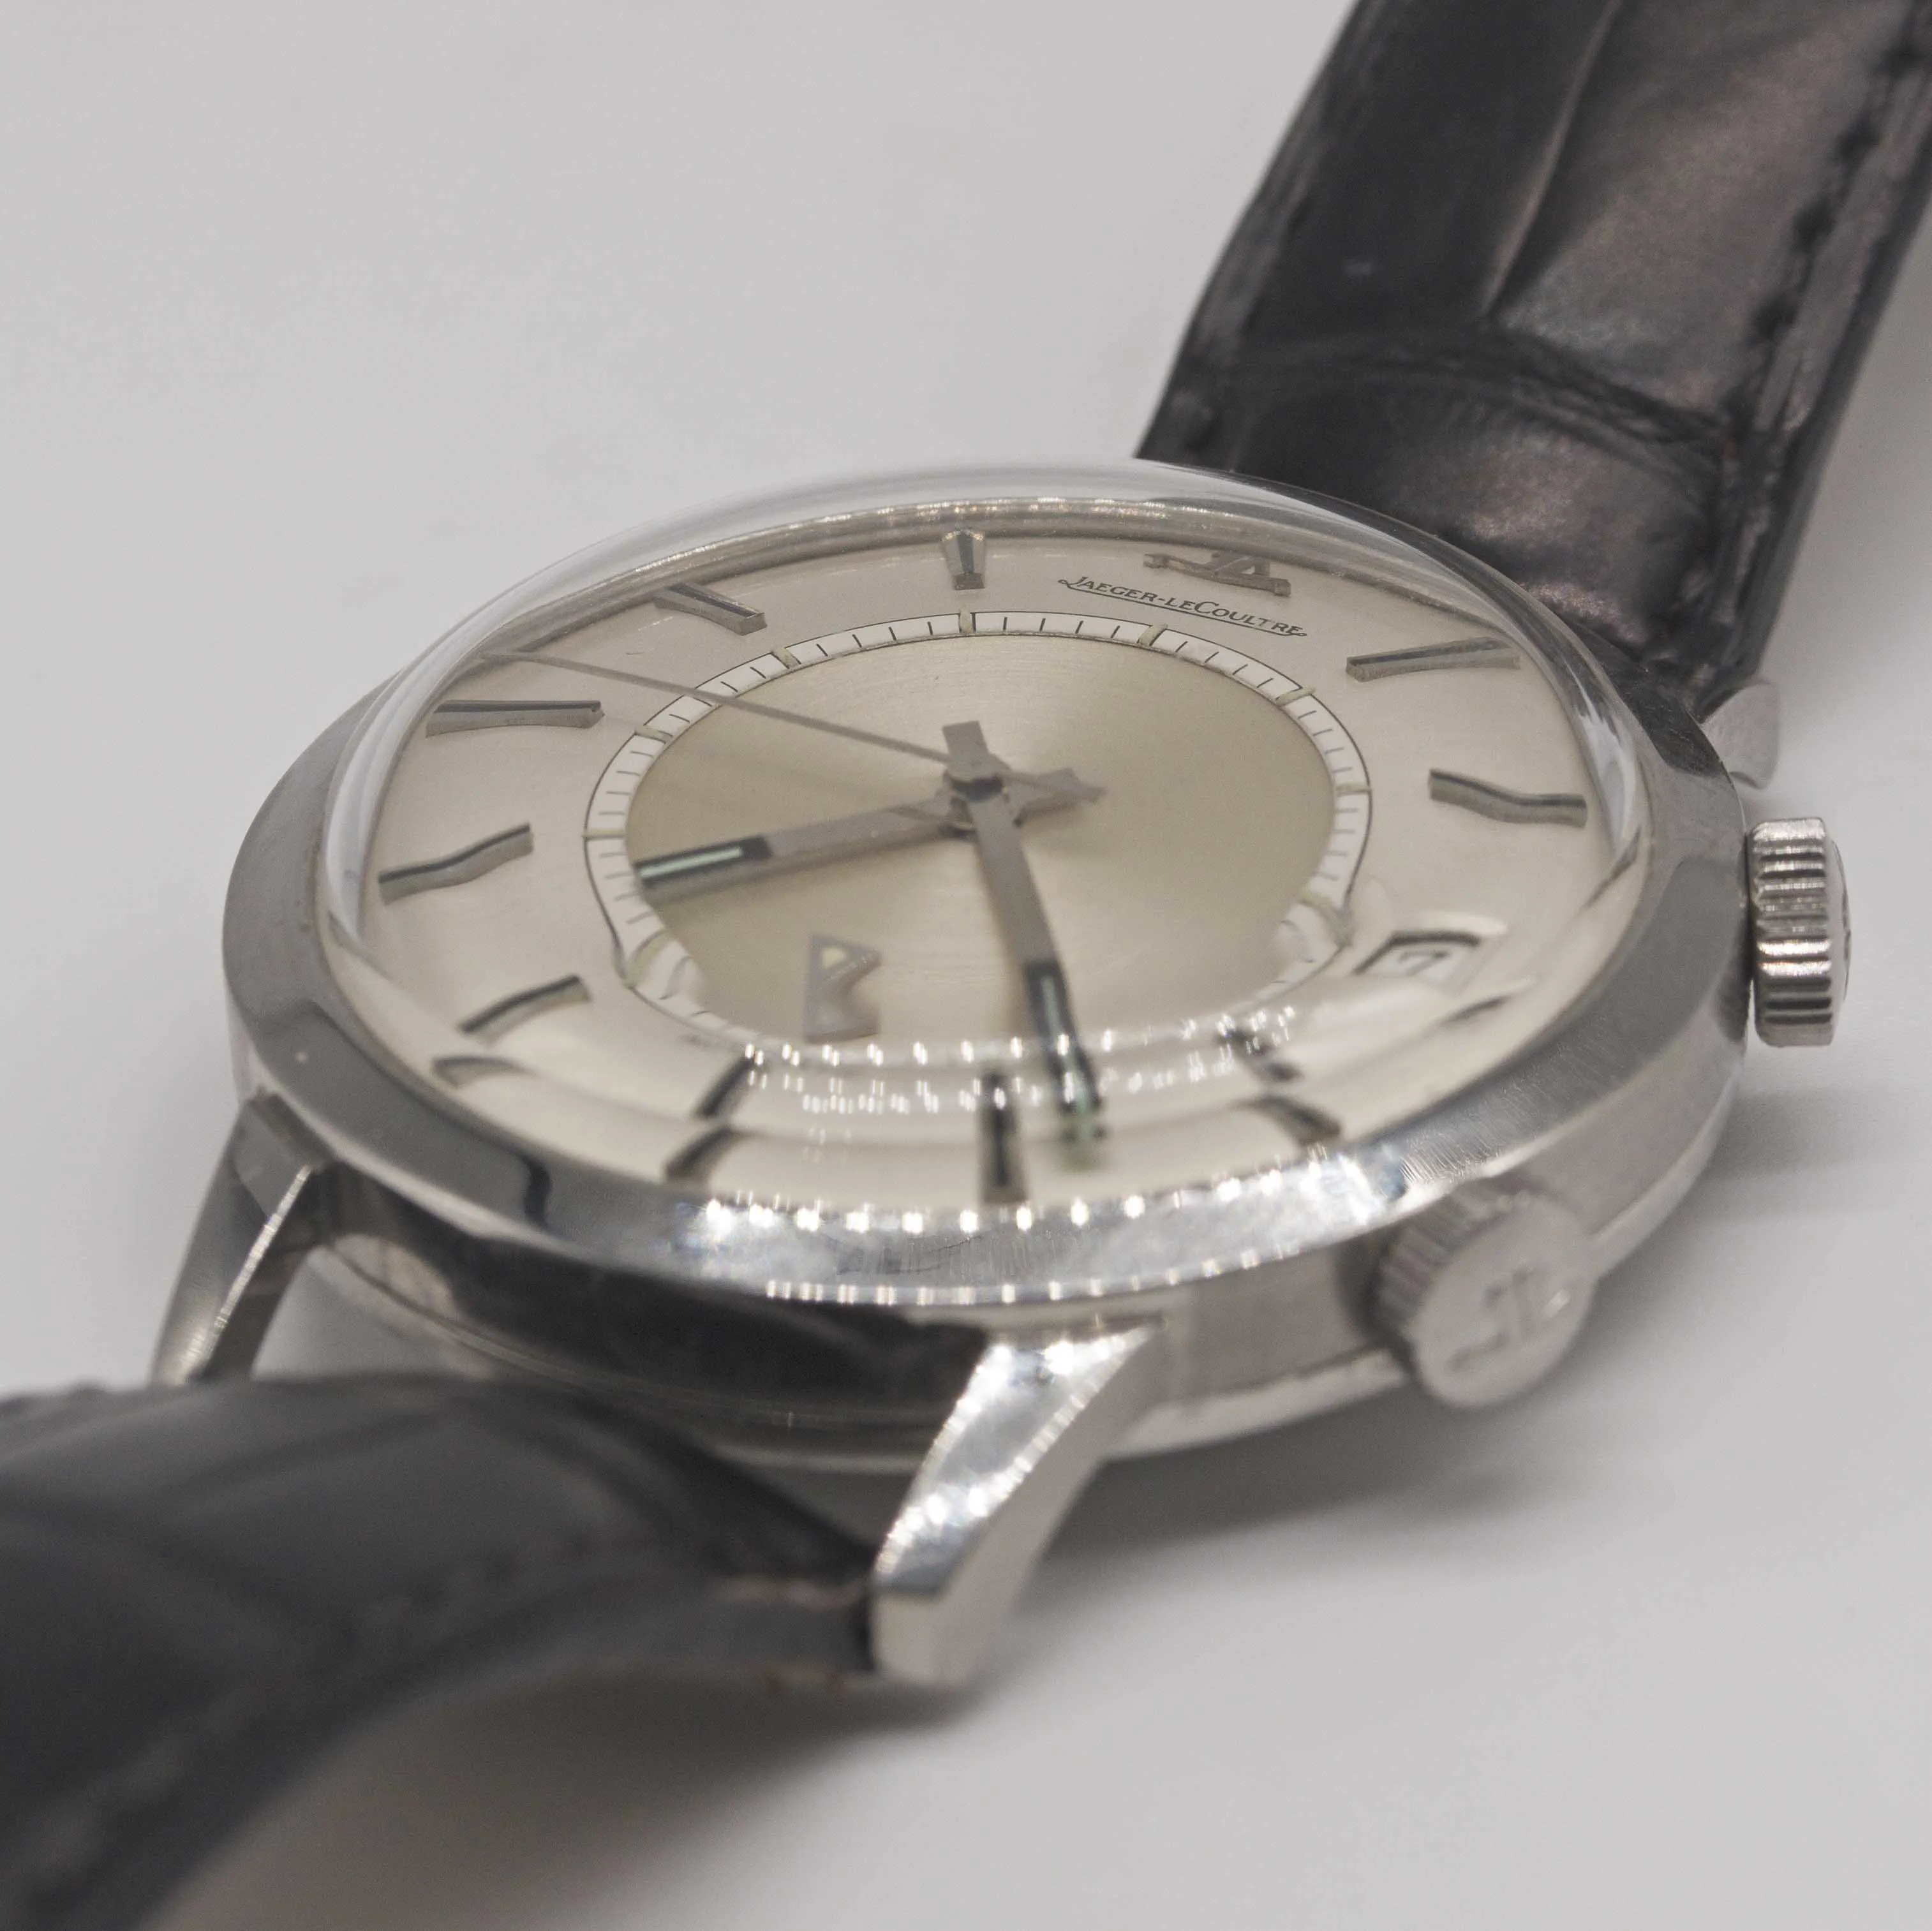 Jaeger-LeCoultre Memovox 855 37mm Stainless steel Silver 2